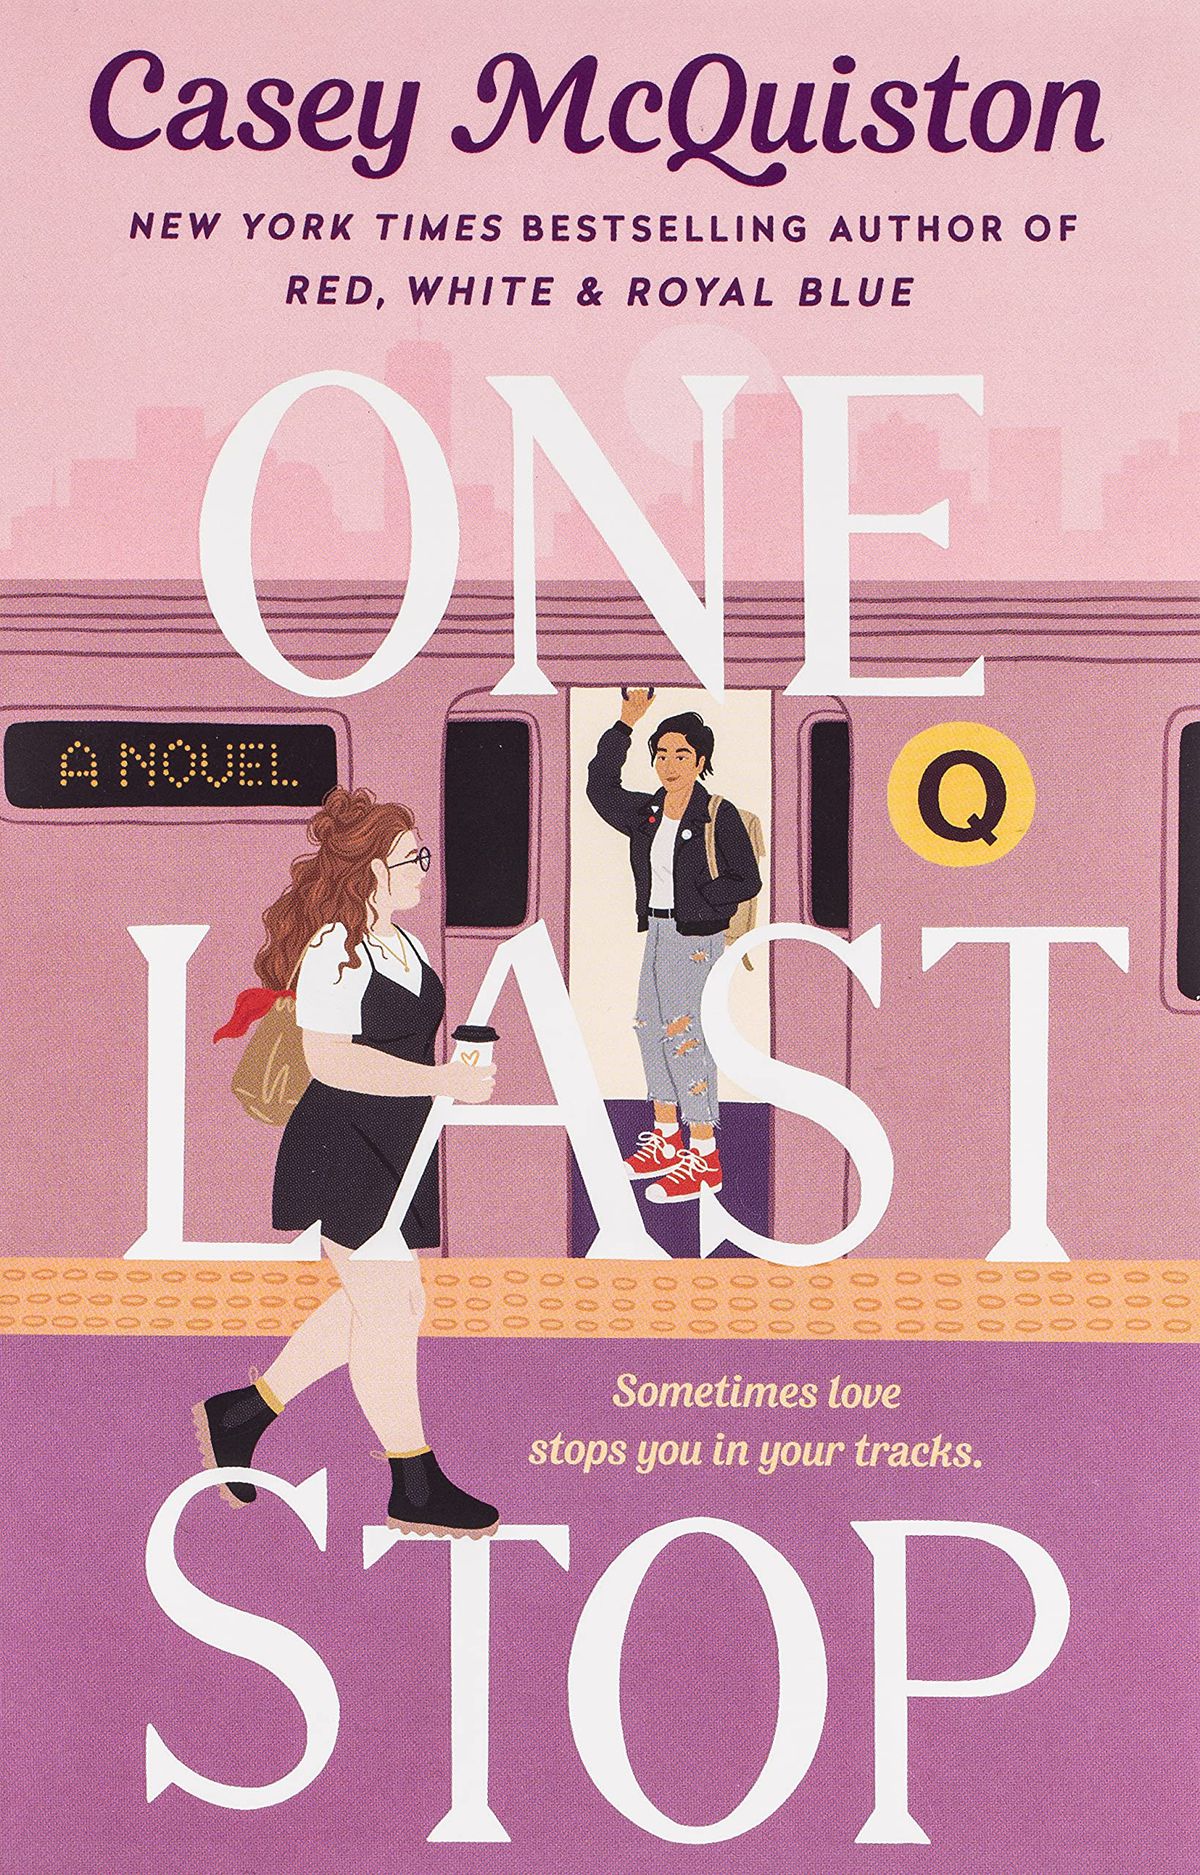 The cover for “One Last Stop” by Casey McQuiston, which shows two women in the subway